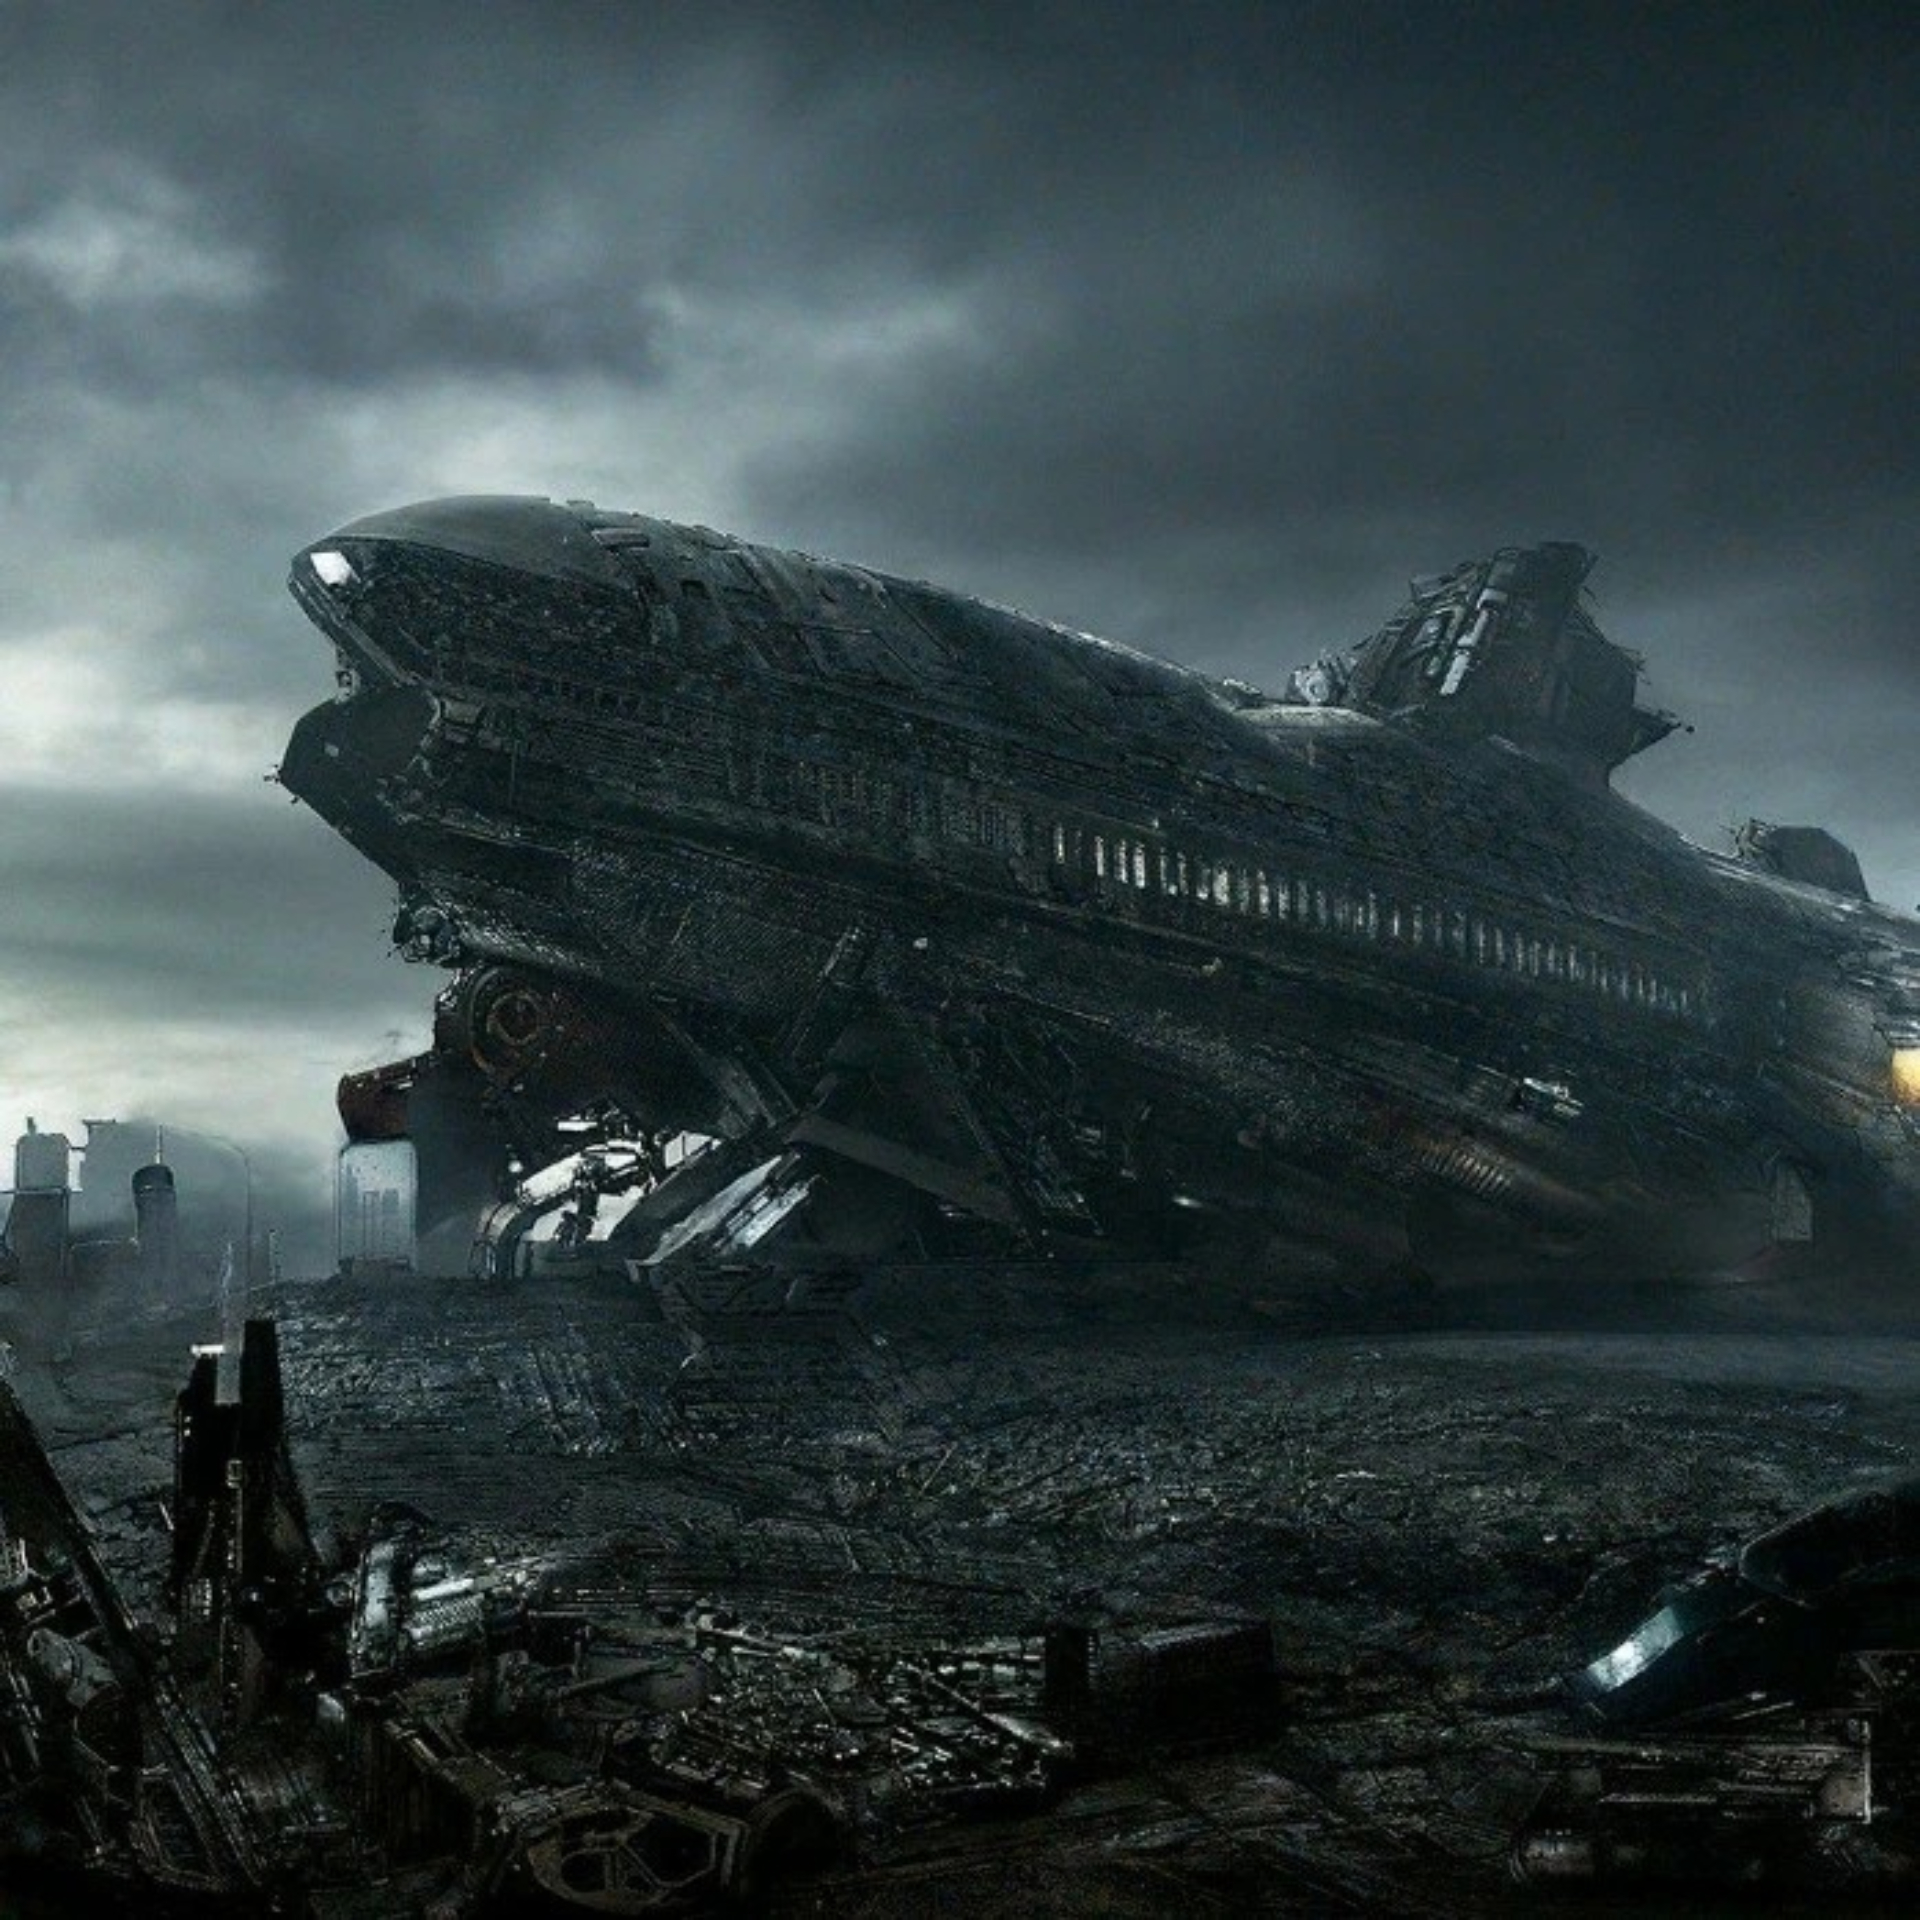 A crashed spaceship in the background of a ruined city